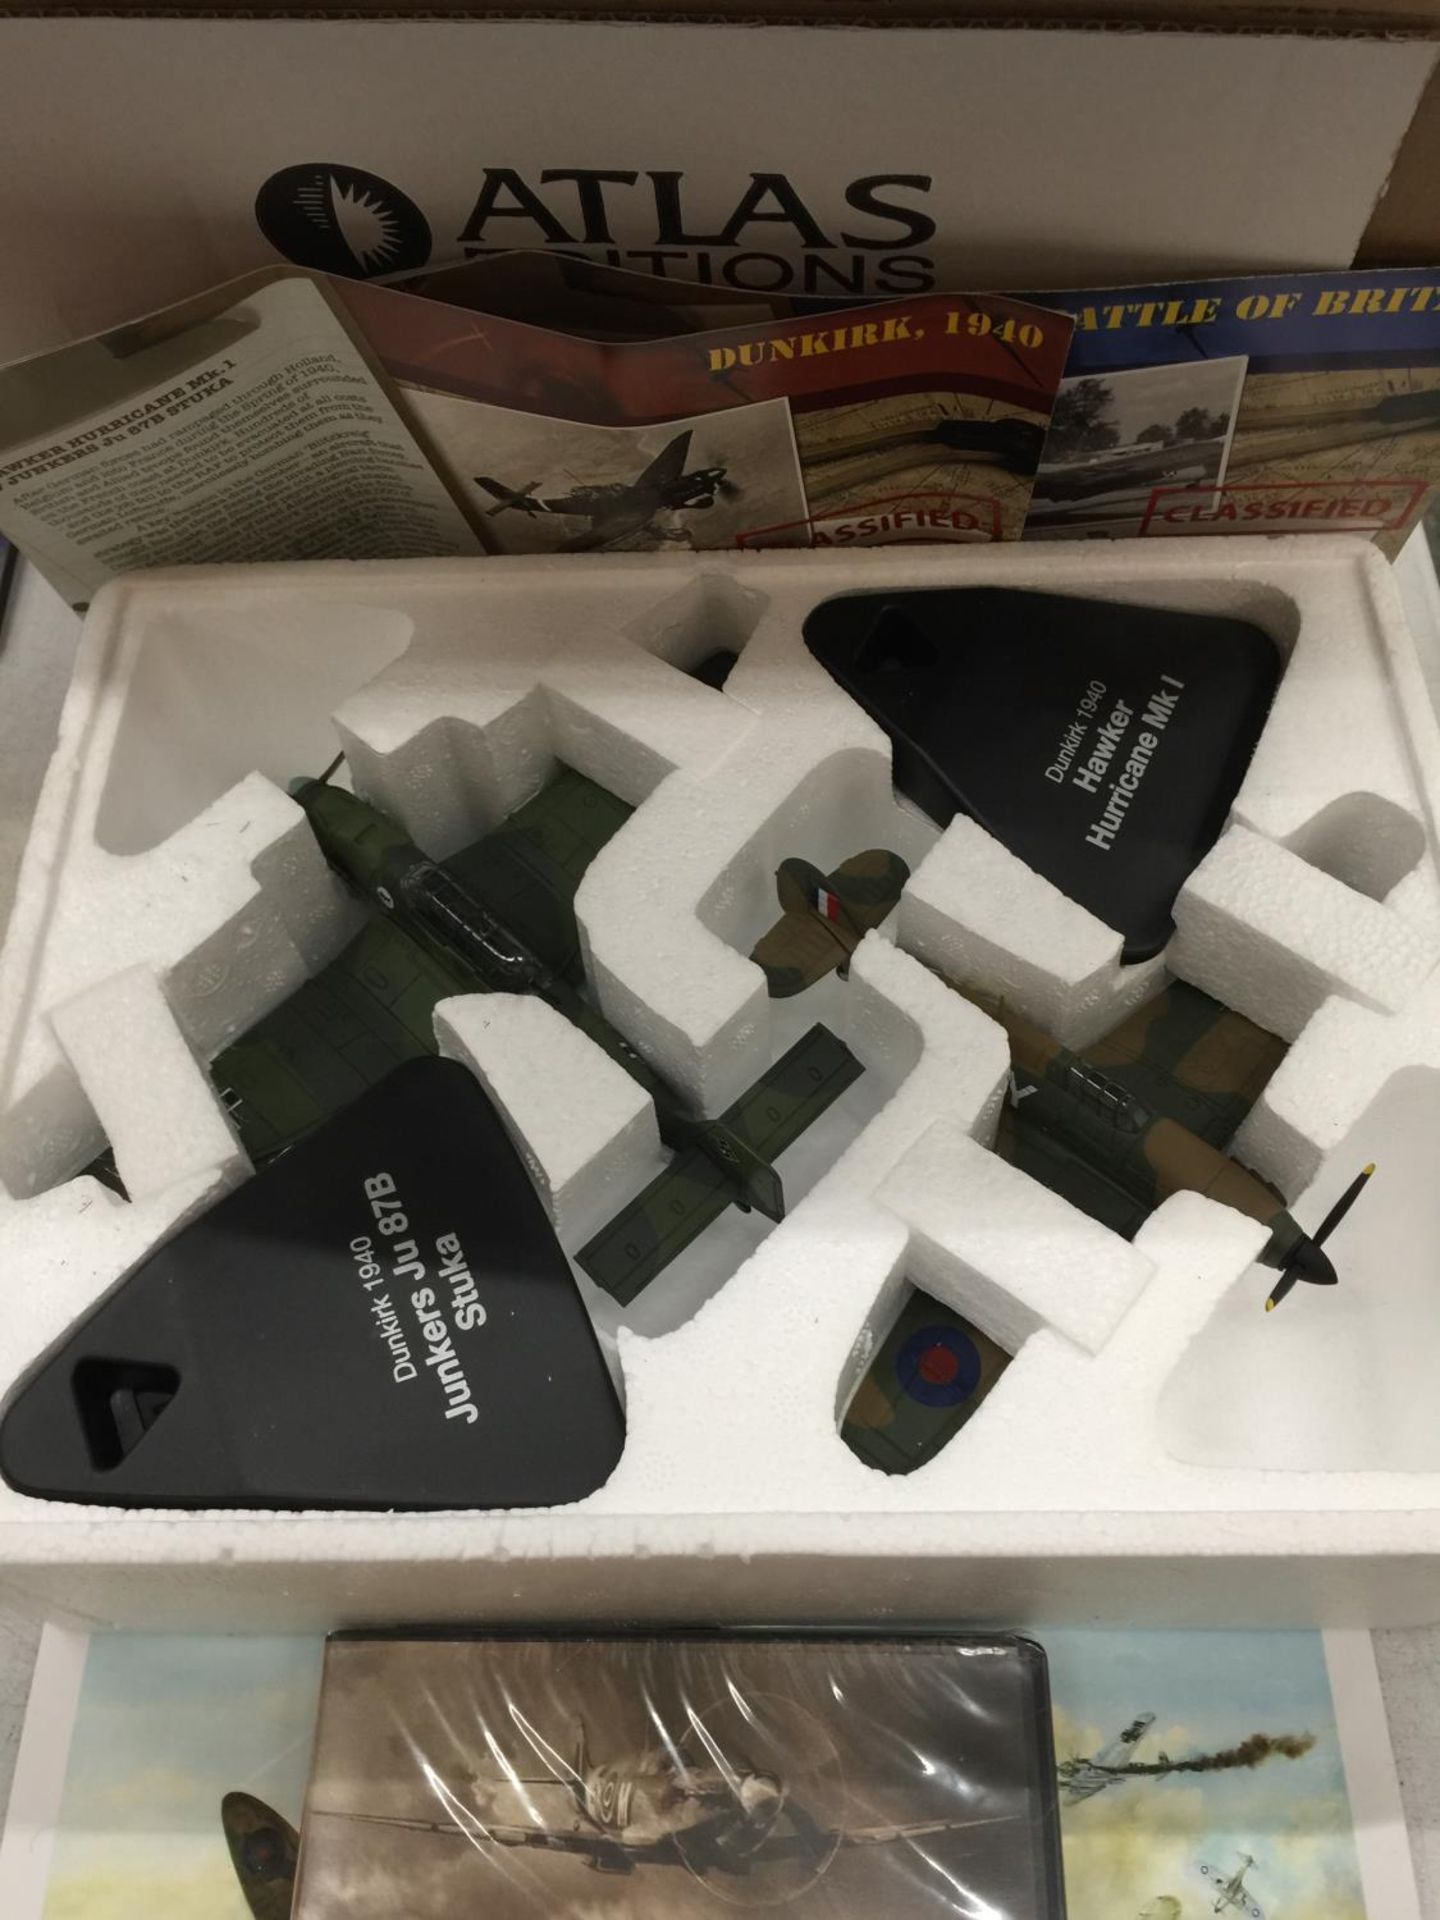 A COLLECTION OF ATLAS EDITION WWII FIGHTER PLANE MODELS TO INCLUDE MESSERSCHMITT BF 109E-4, - Image 3 of 5